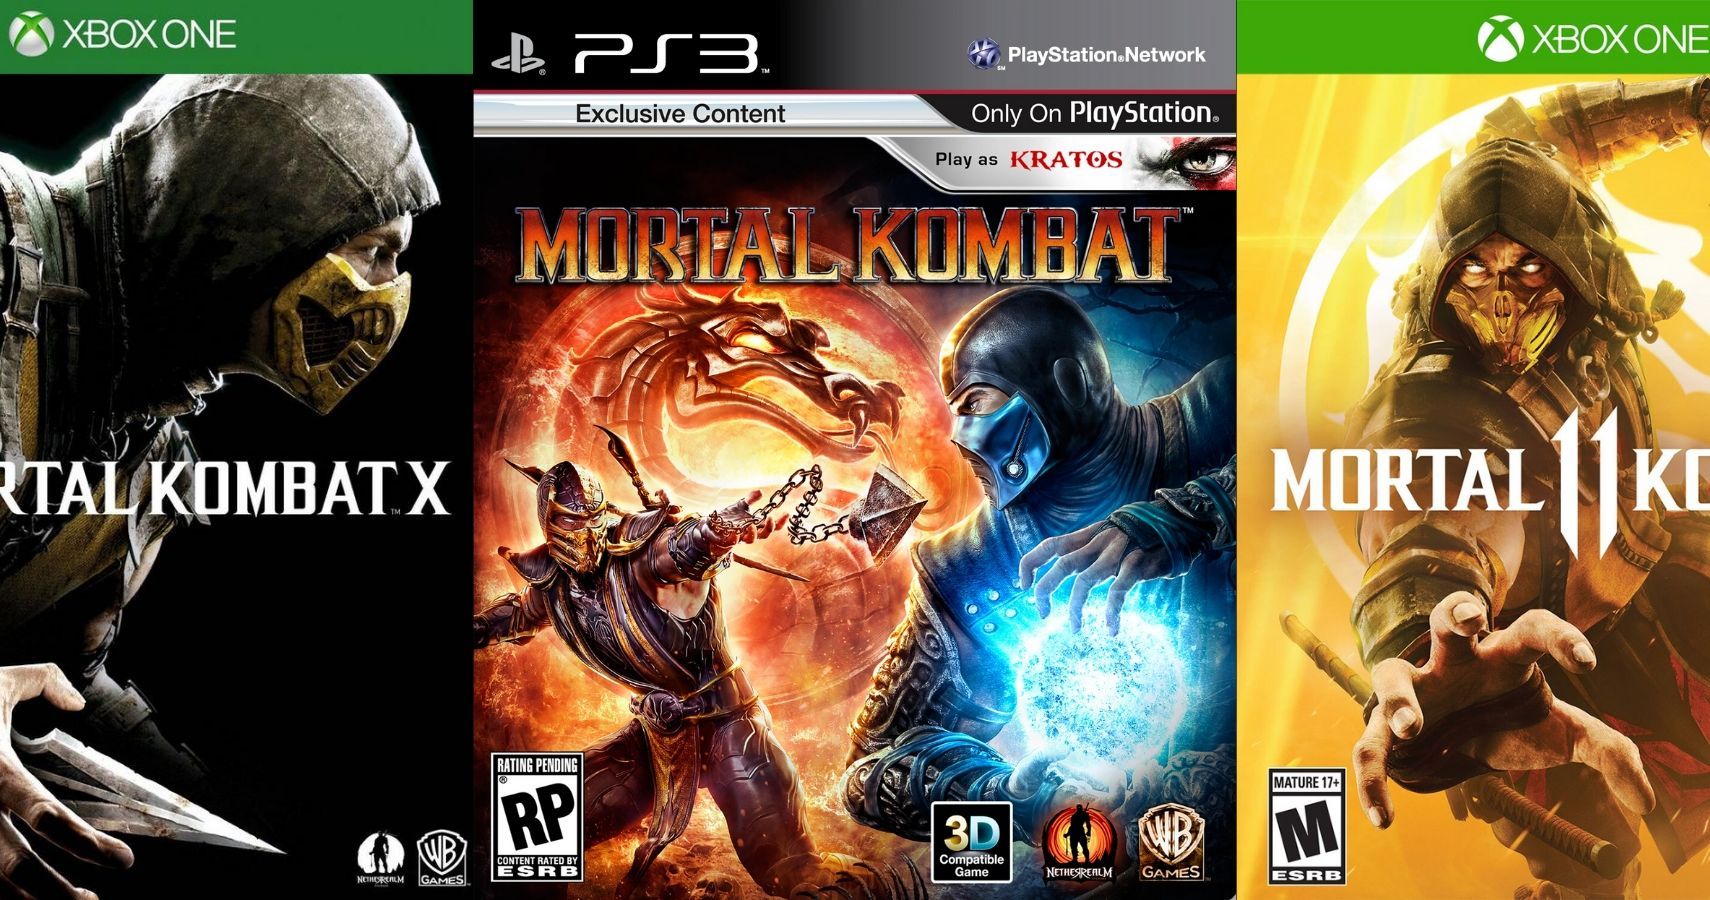 10 of the Best Mortal Kombat Games of All Time (Based on